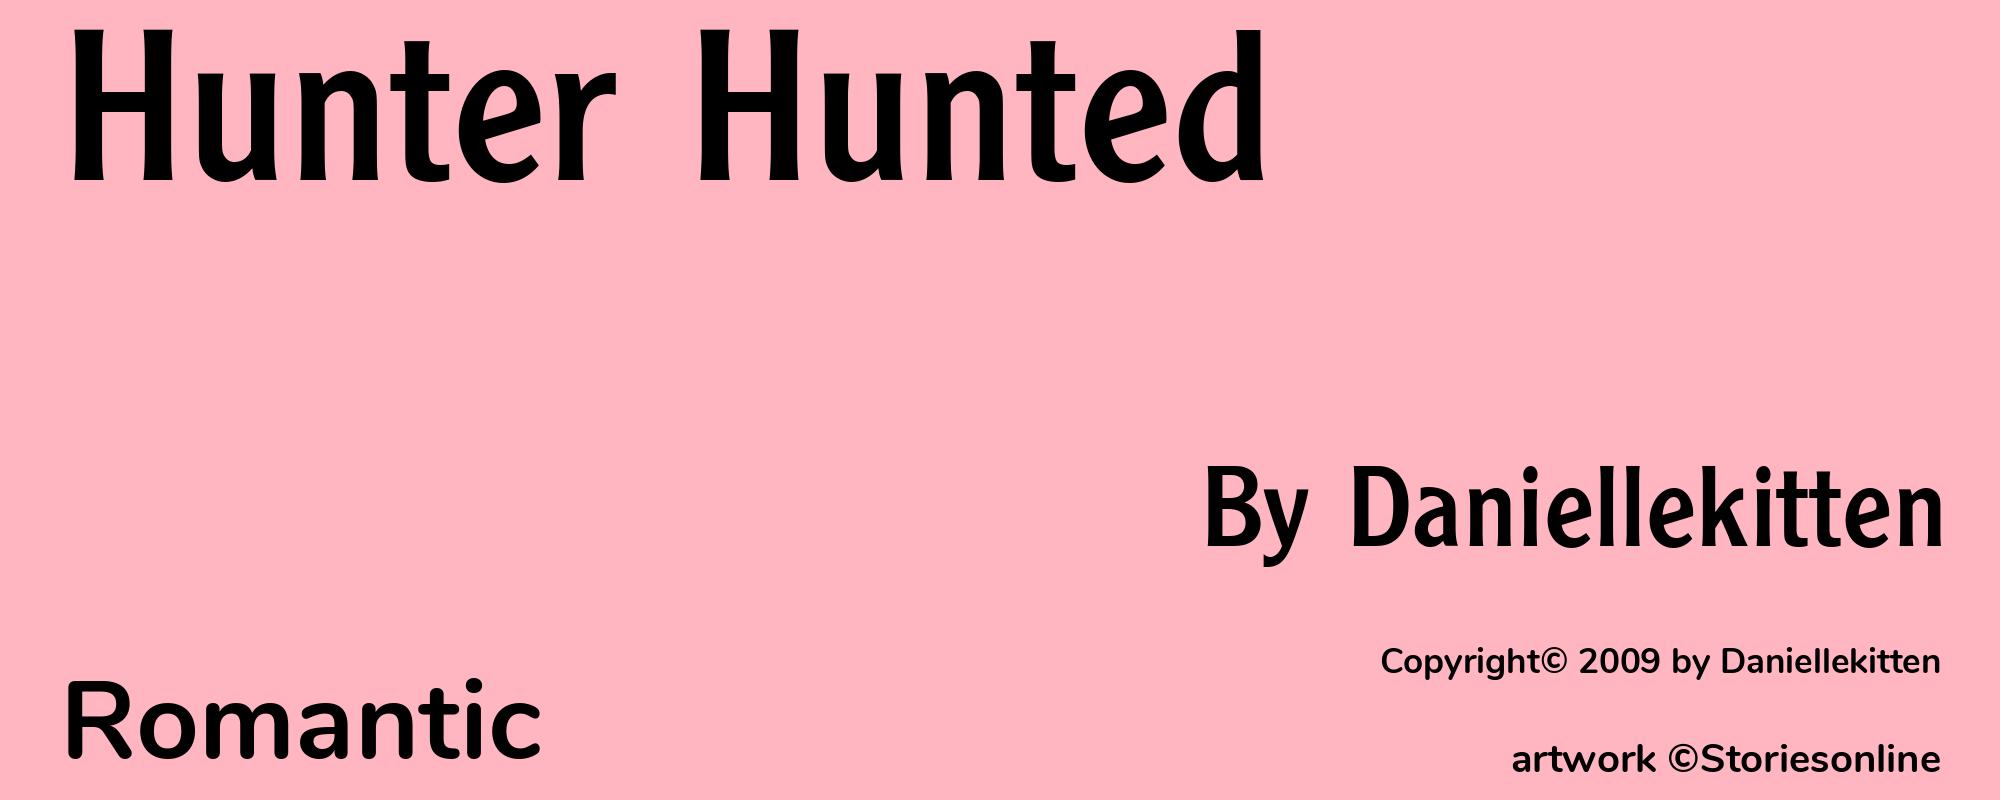 Hunter Hunted - Cover